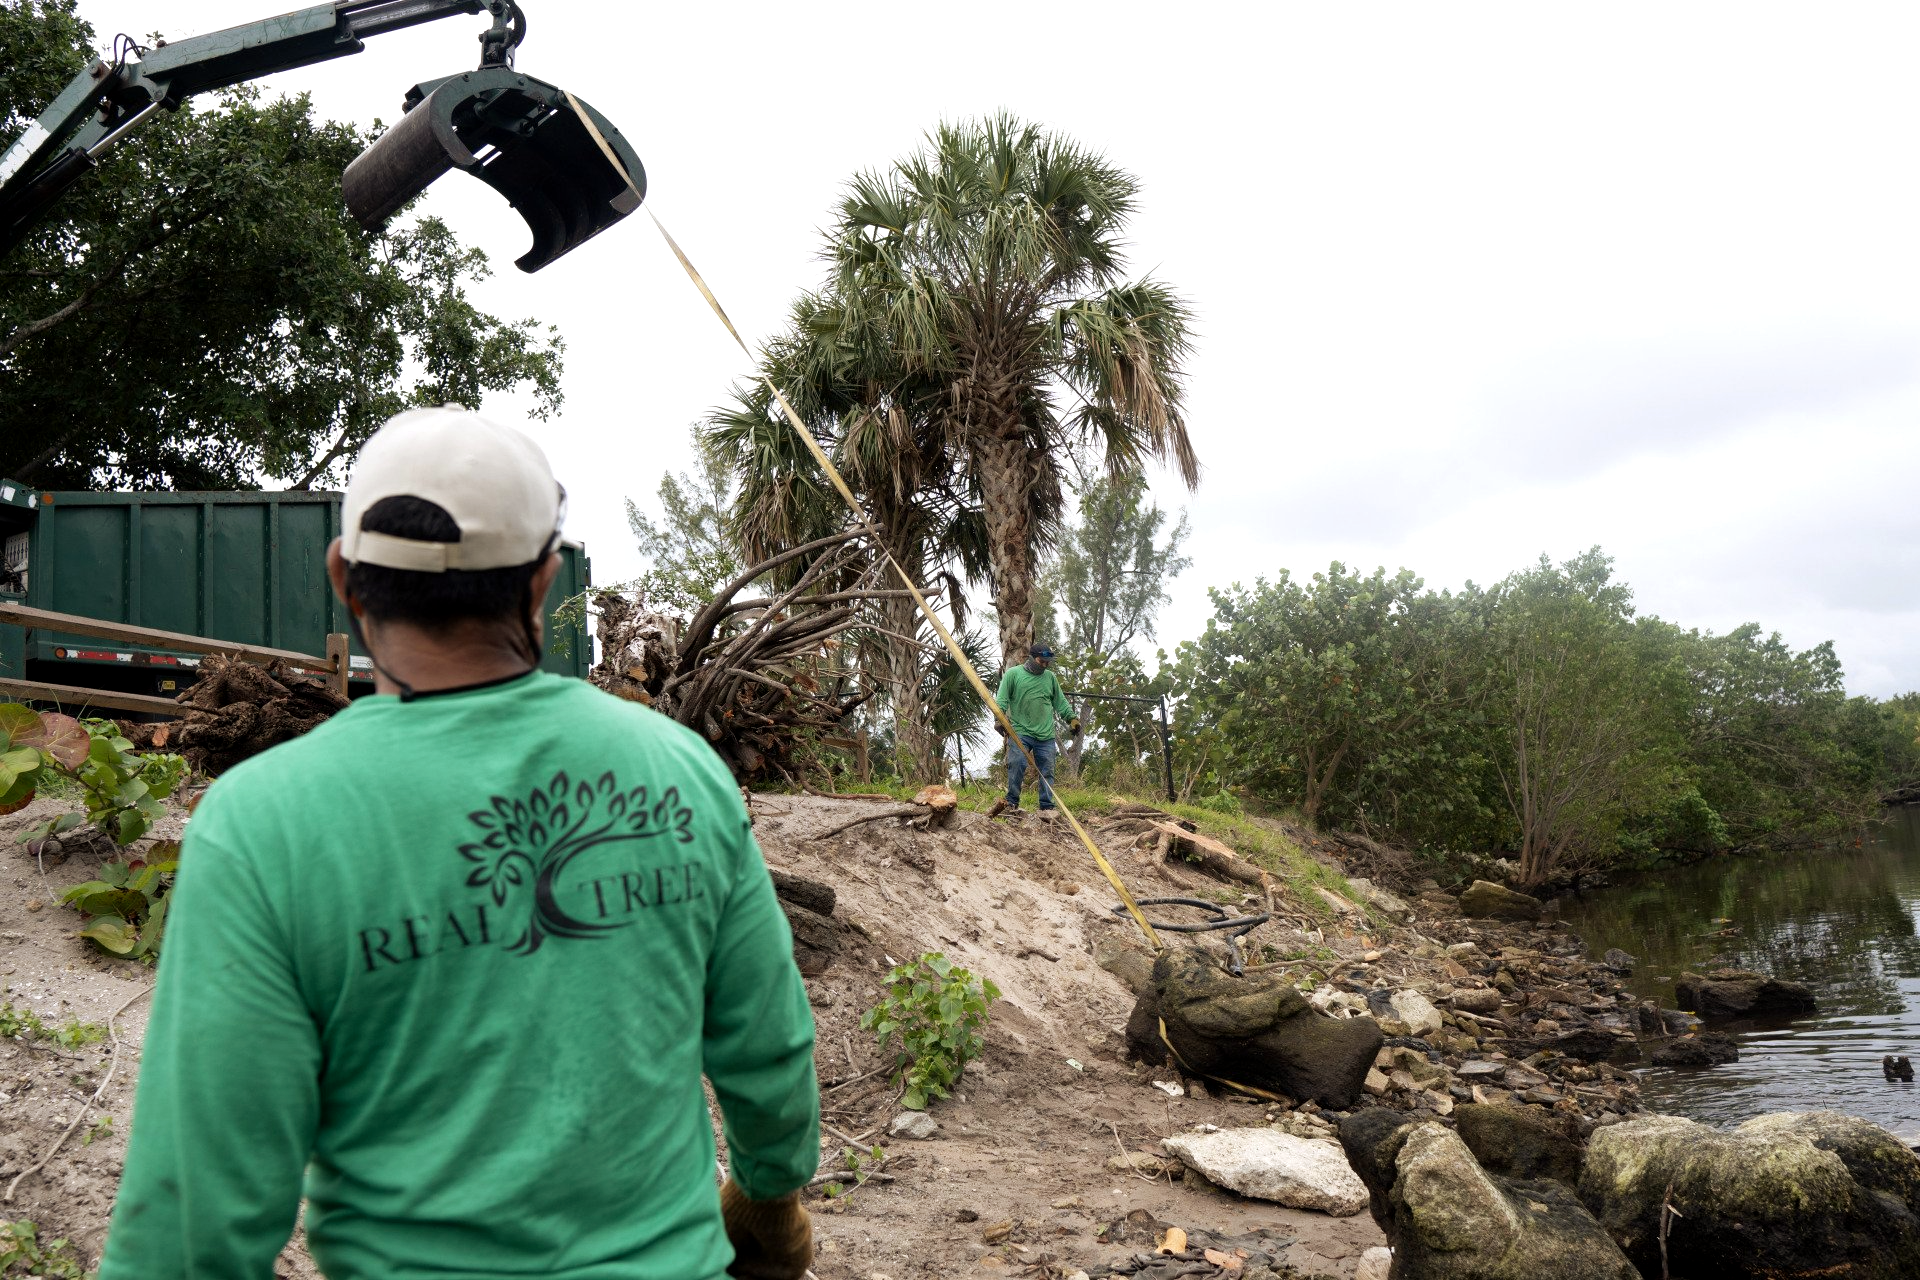 Uniformed tree service worker standing by while a tree removal is taking place on the bank of the intracoastal waterway in Fort Lauderdale